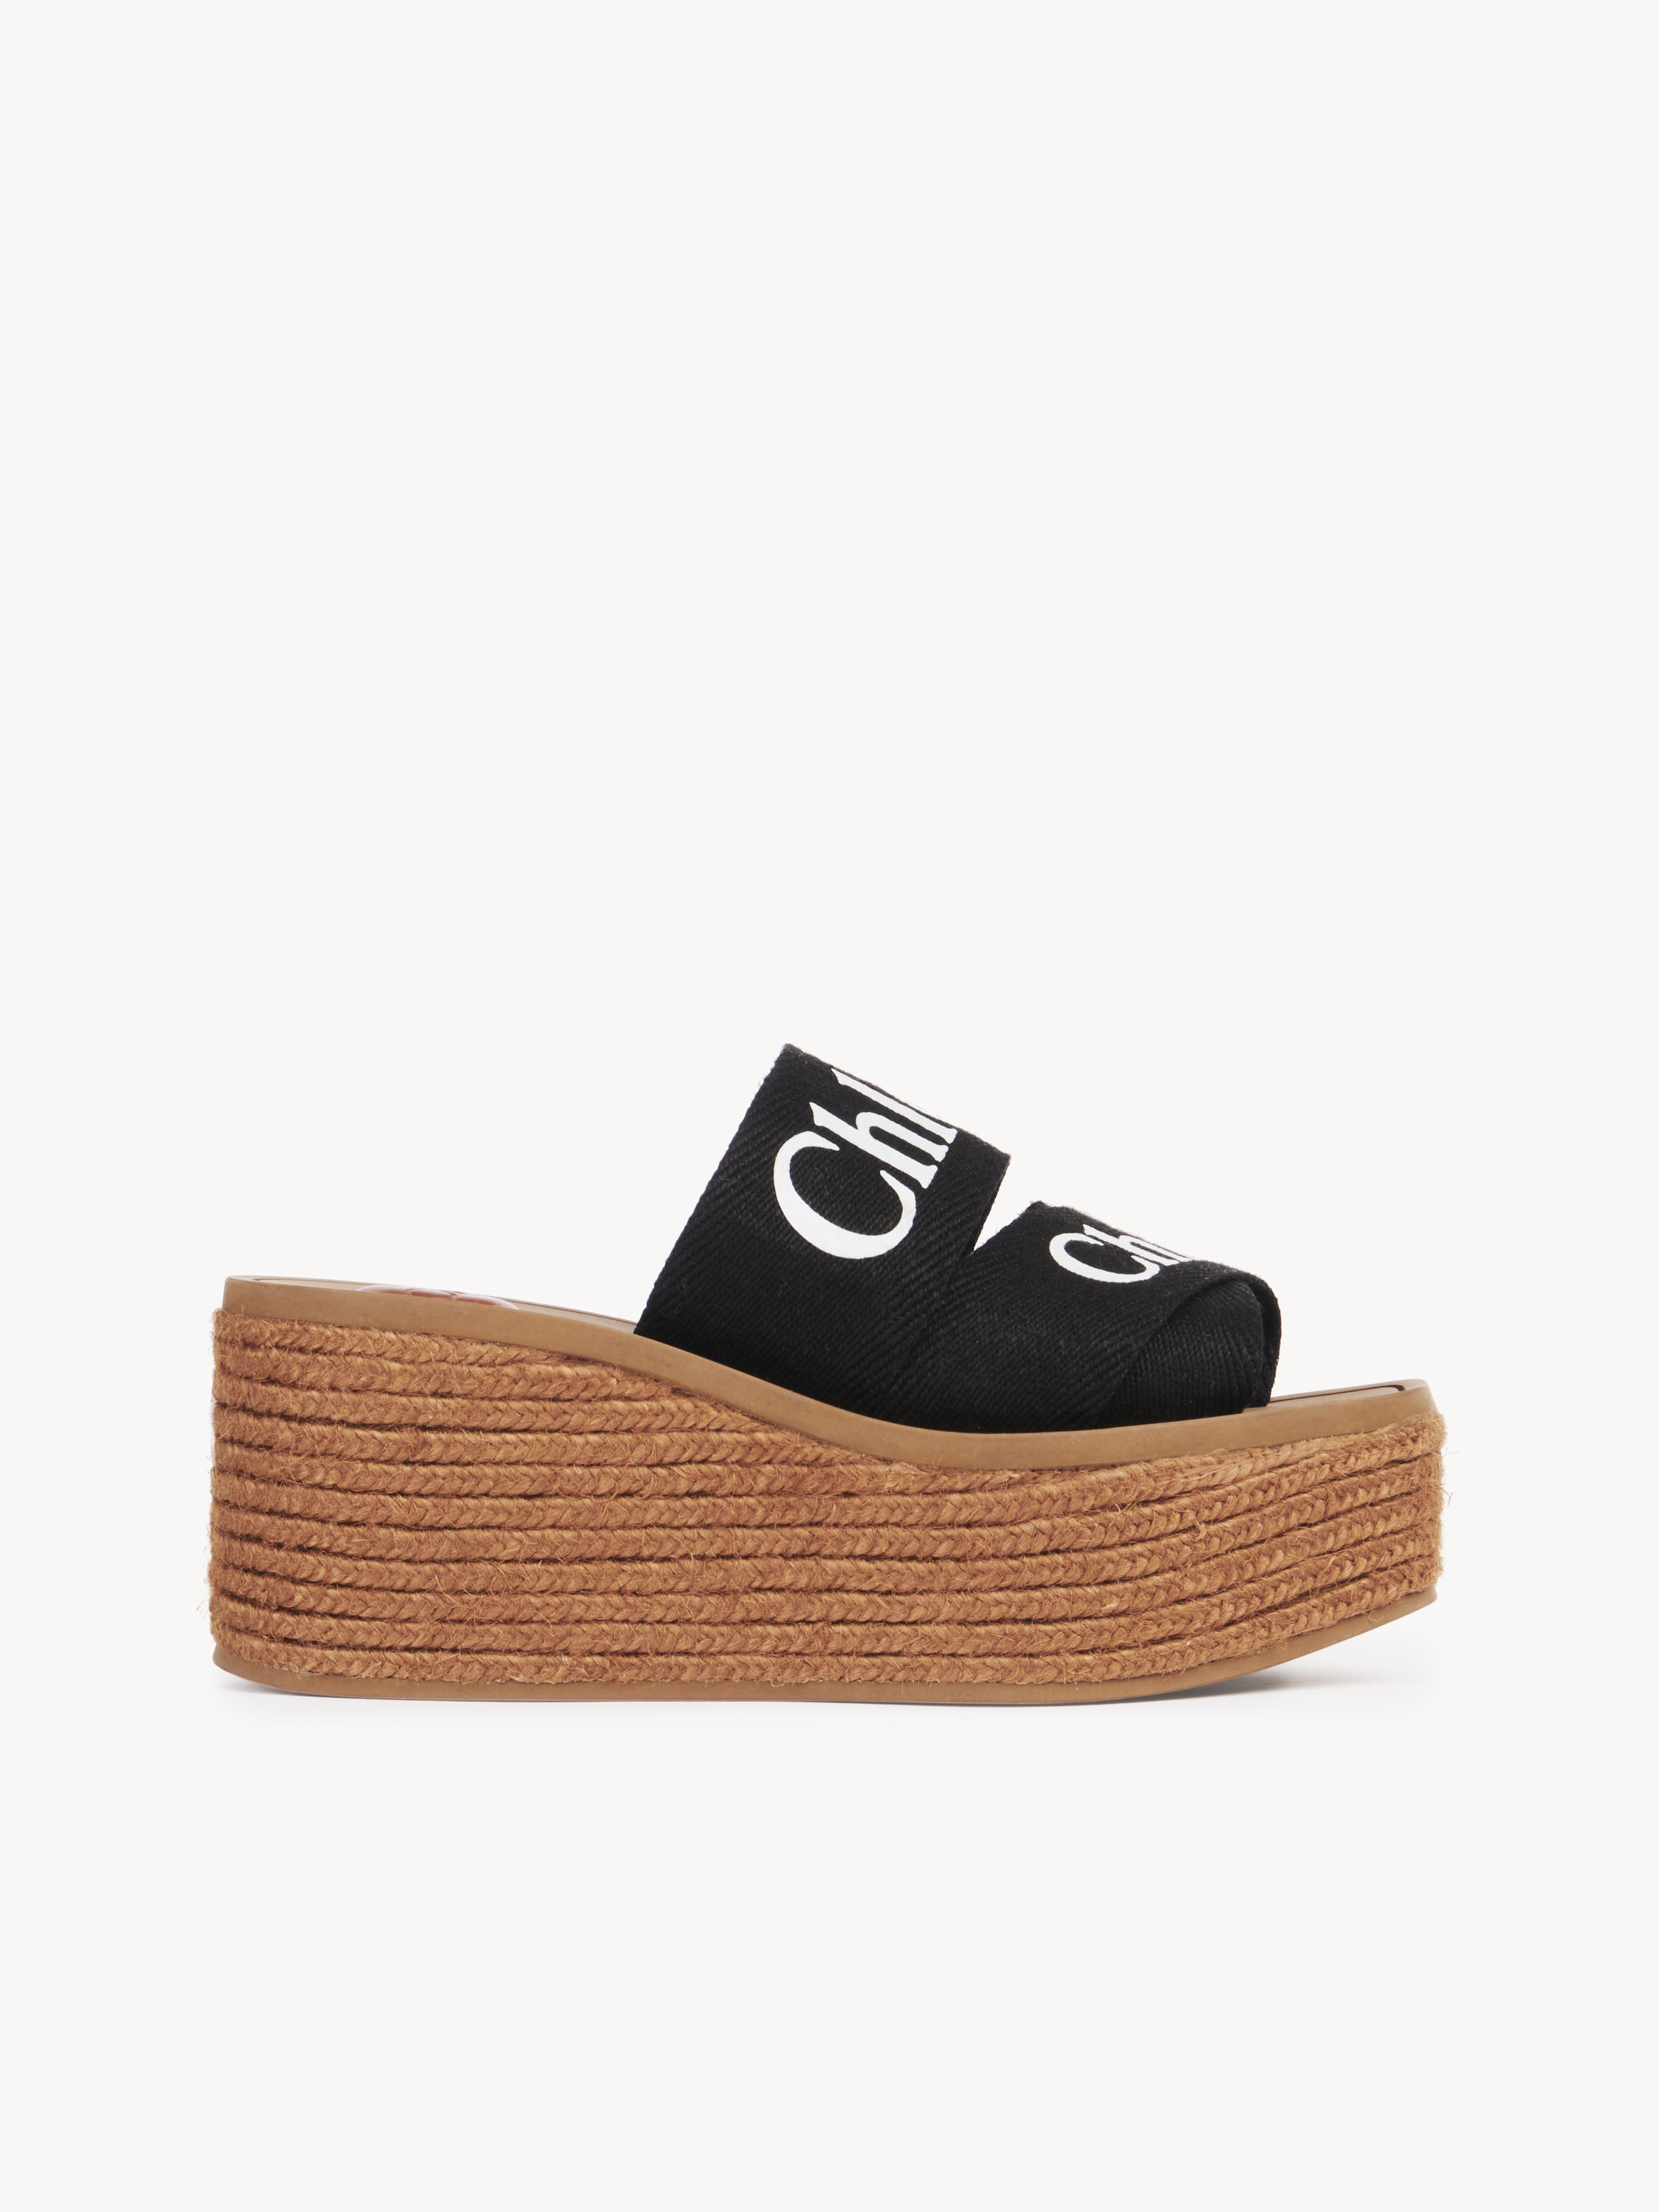 Chloé Mules Espadrilles Woody Femme Noir Taille 35 90% Lin, 10% Polyester, Quercus Suber, Farmed, Coo Spai